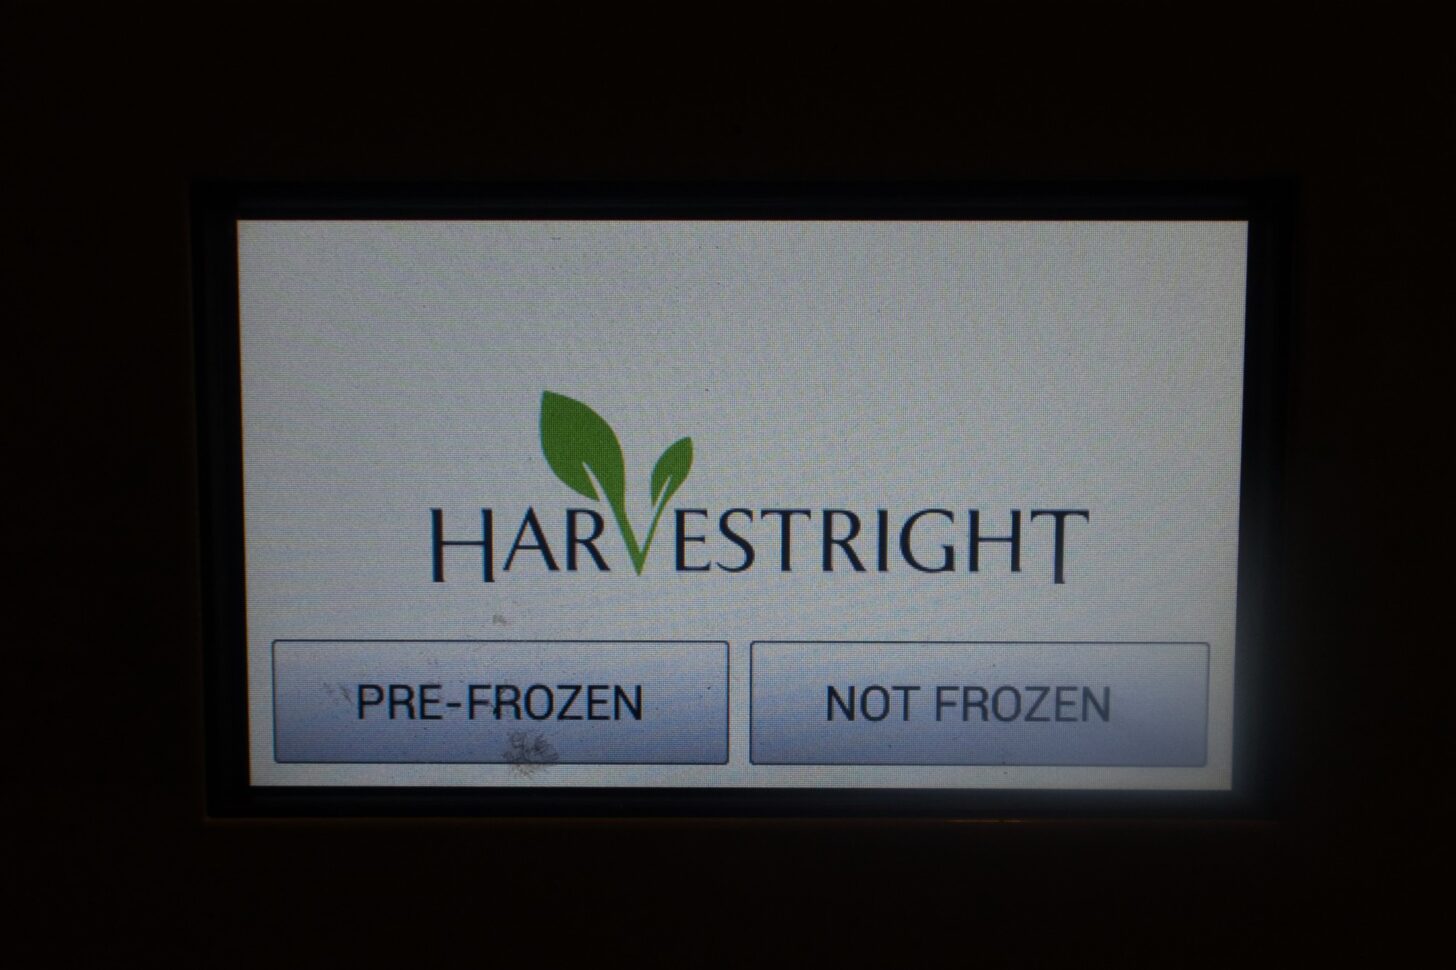 a simple lcd menu with two options - pre-frozen (left) and not frozen (right)